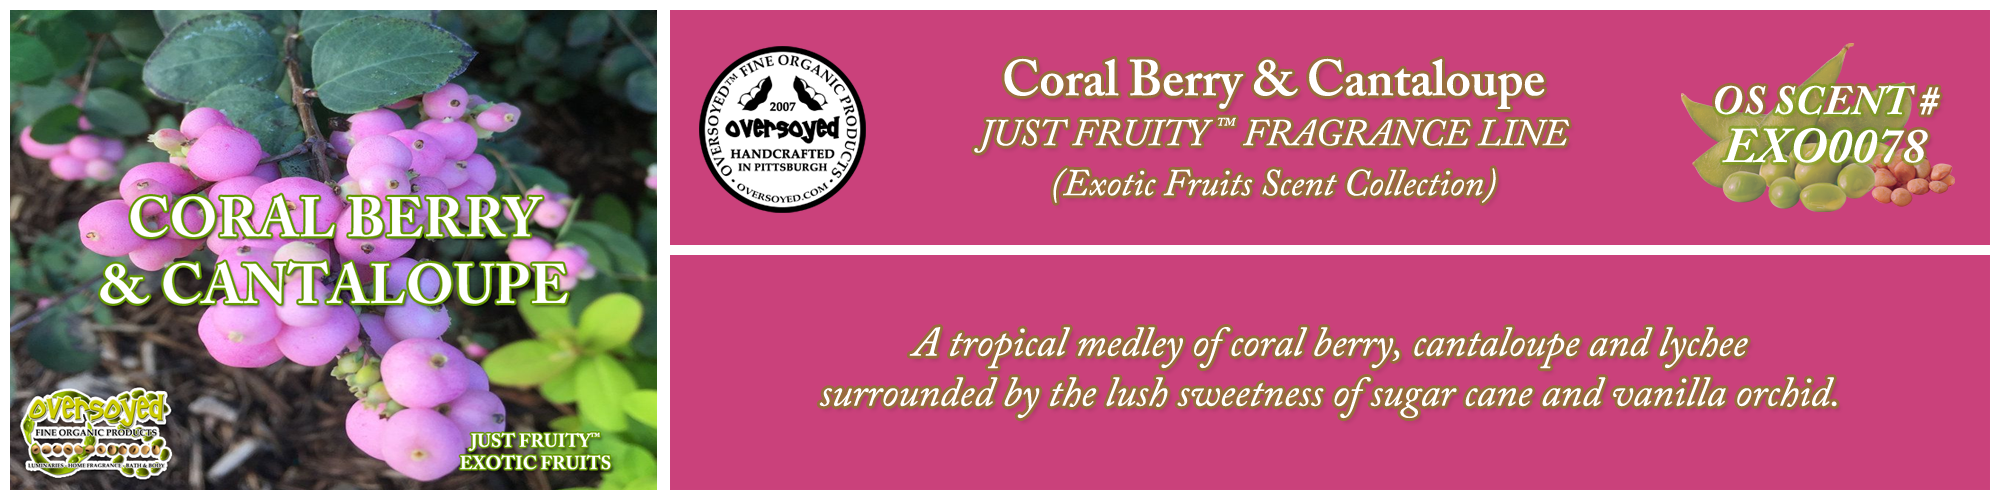 Coral Berry & Cantaloupe Handcrafted Products Collection